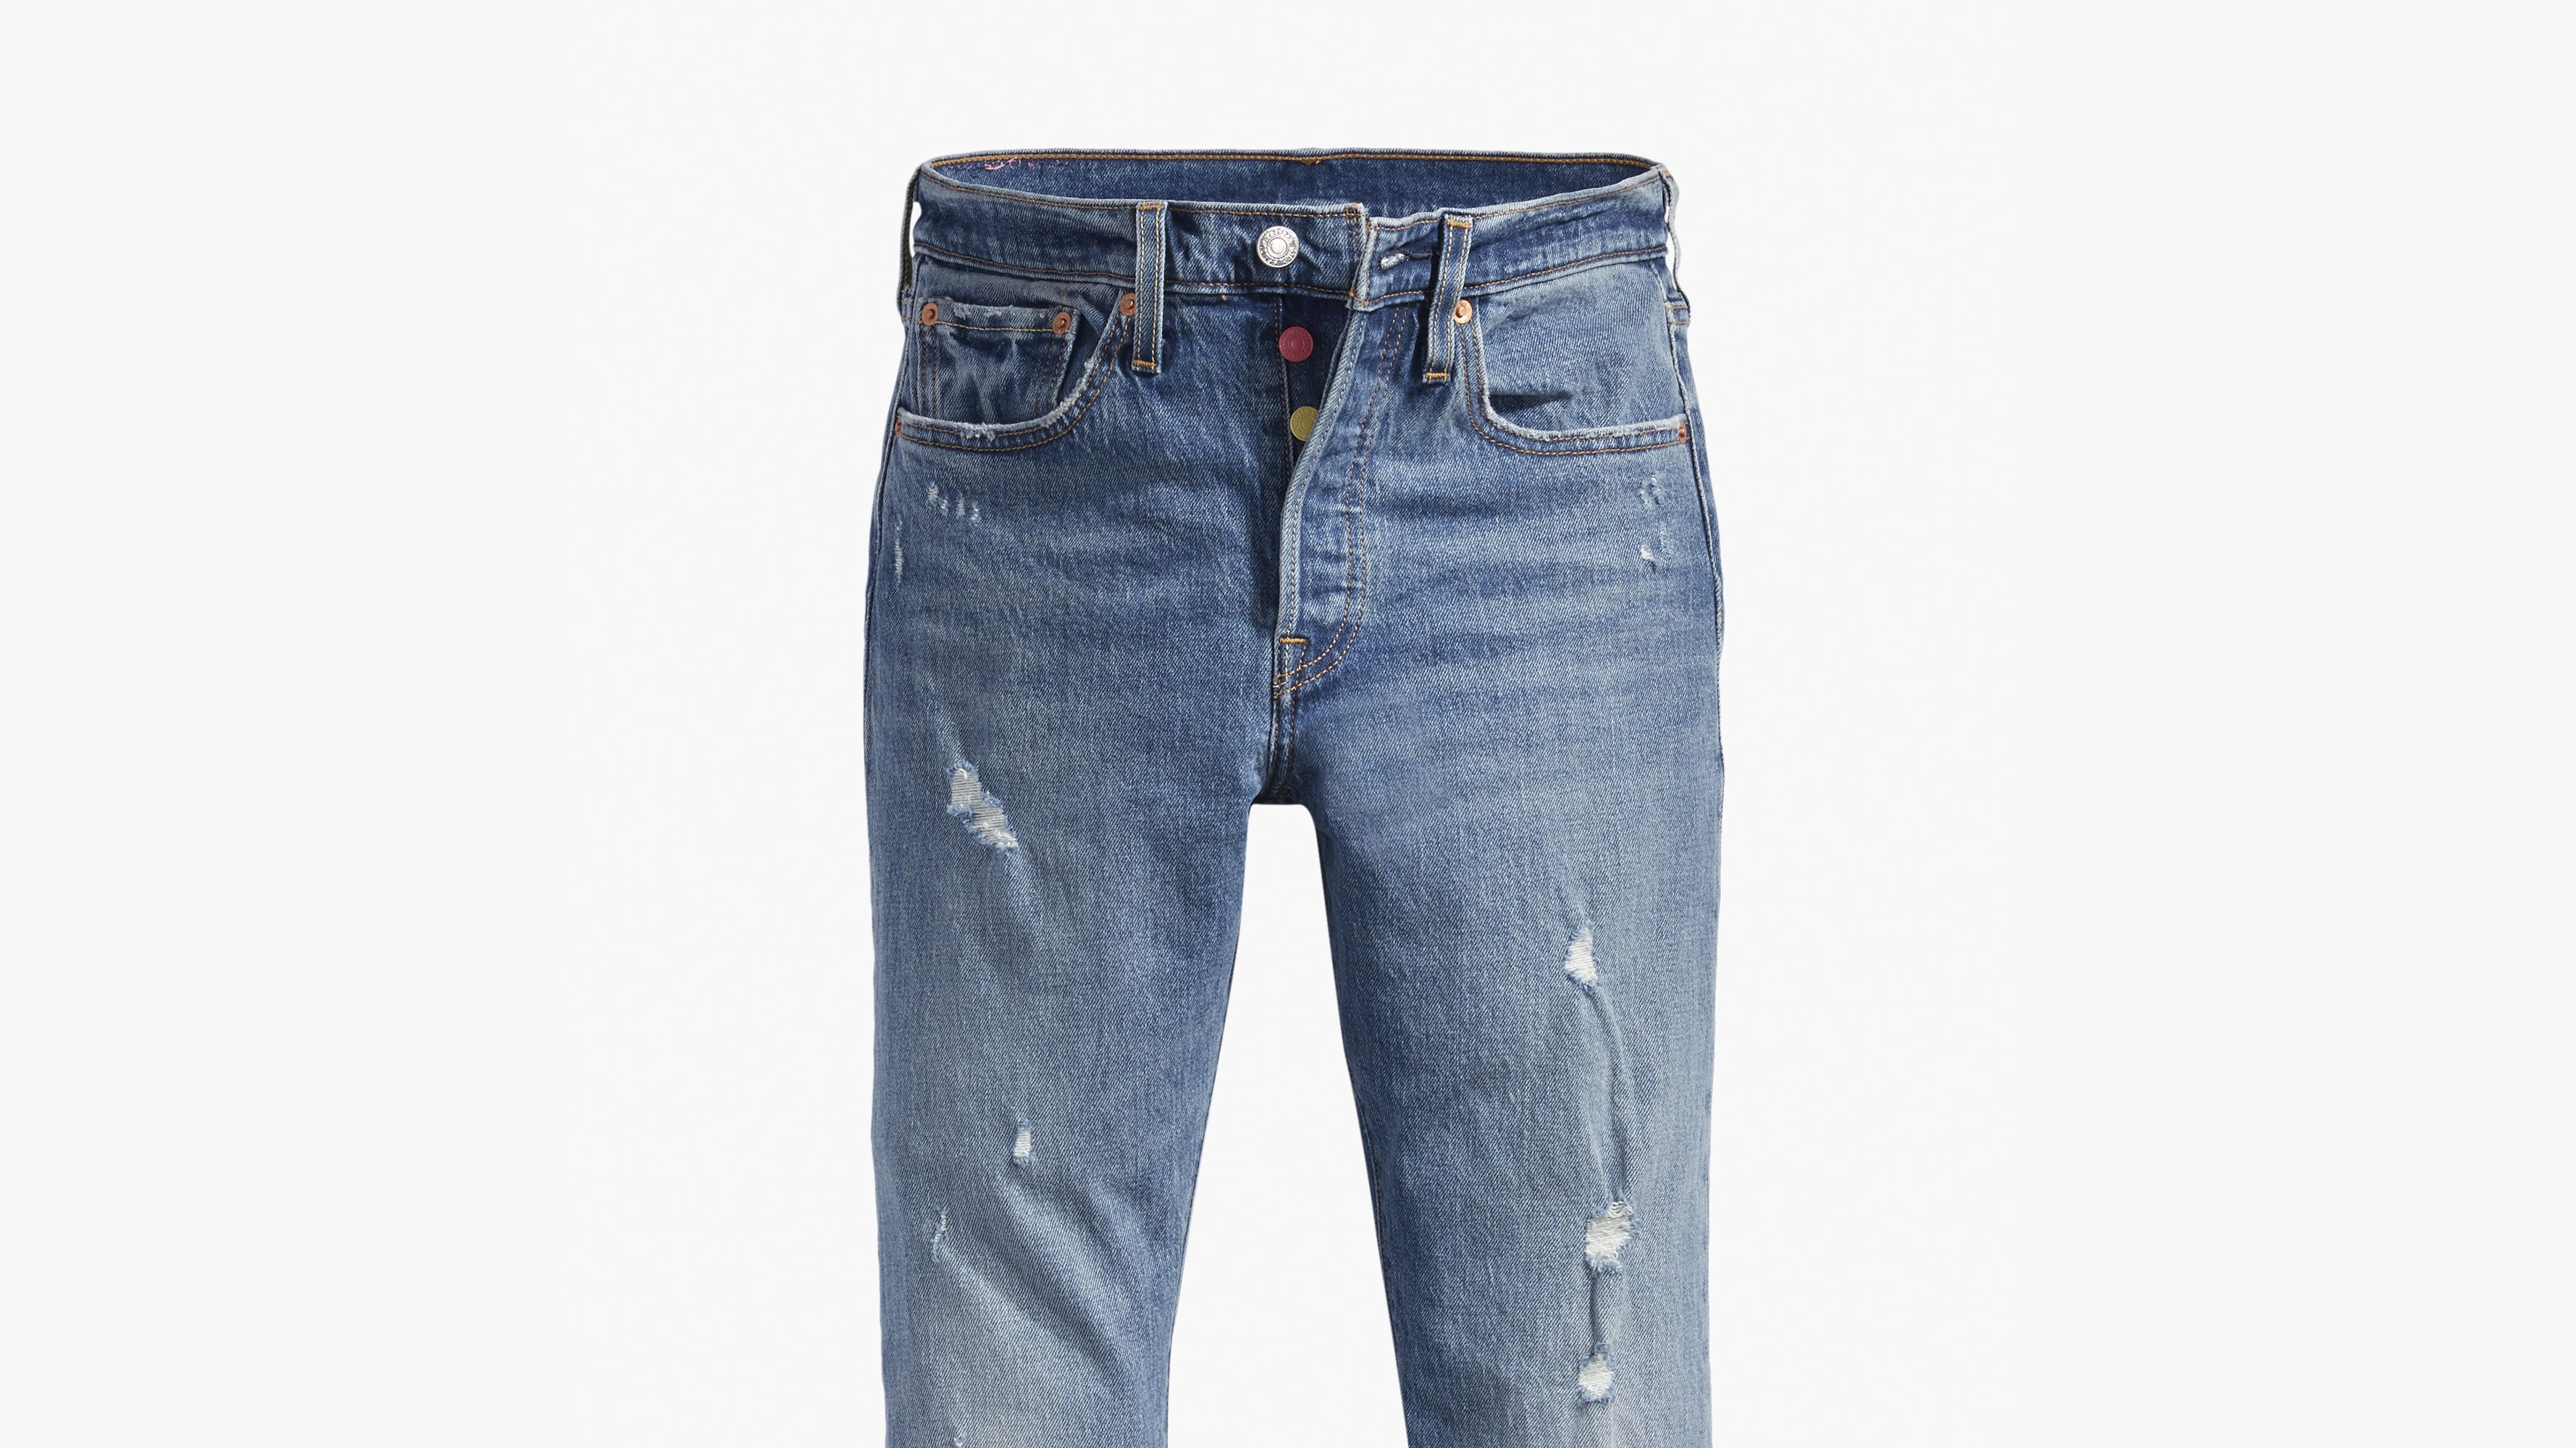 levi strauss 501 button fly jeans